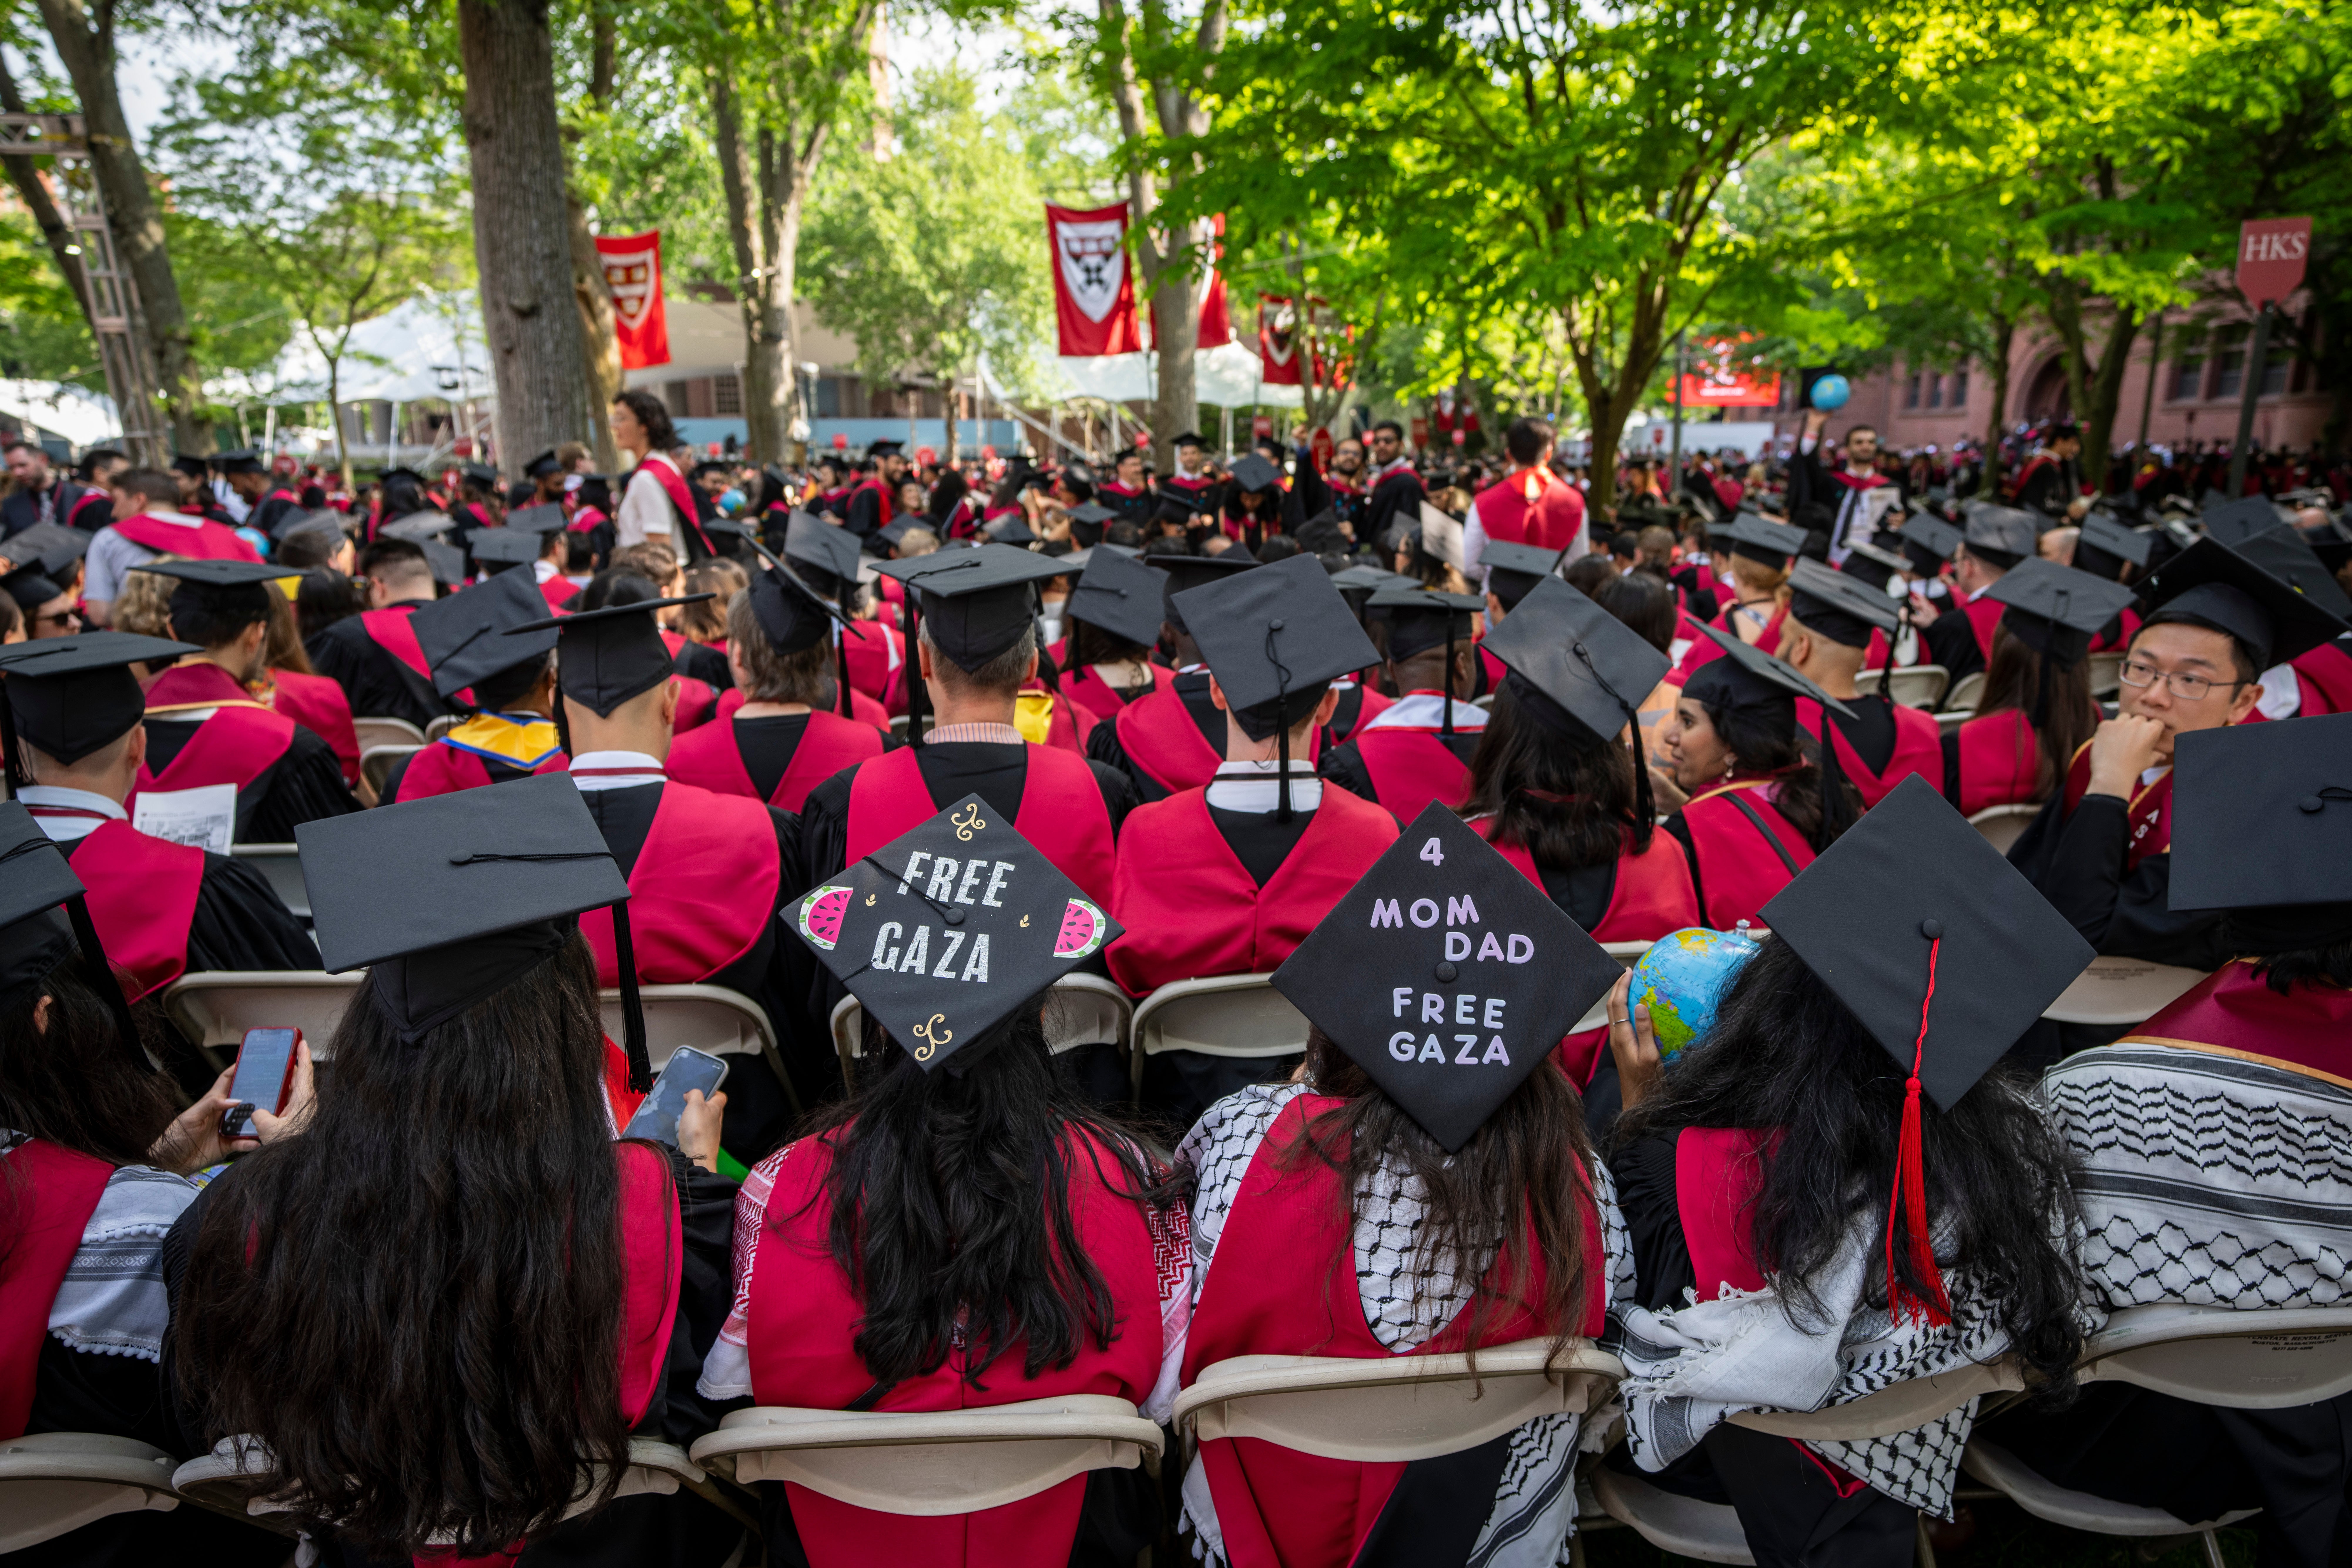 Graduating students with messages supporting Gaza on their mortarboards during commencement in Harvard Yard